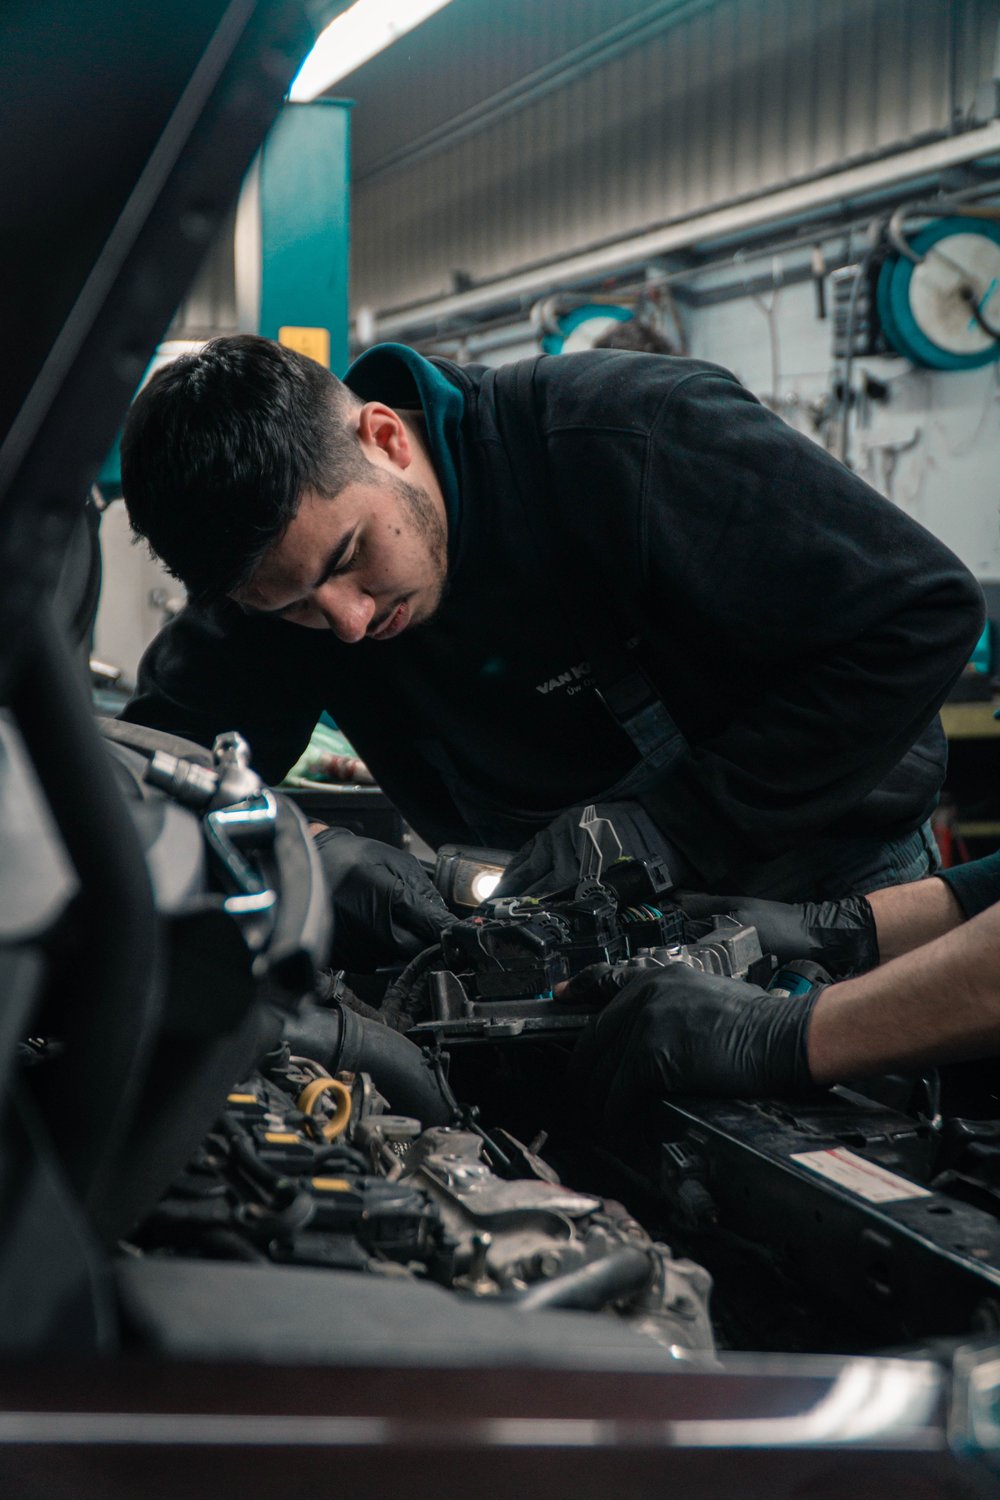 Qualified auto-repair workers are badly needed.